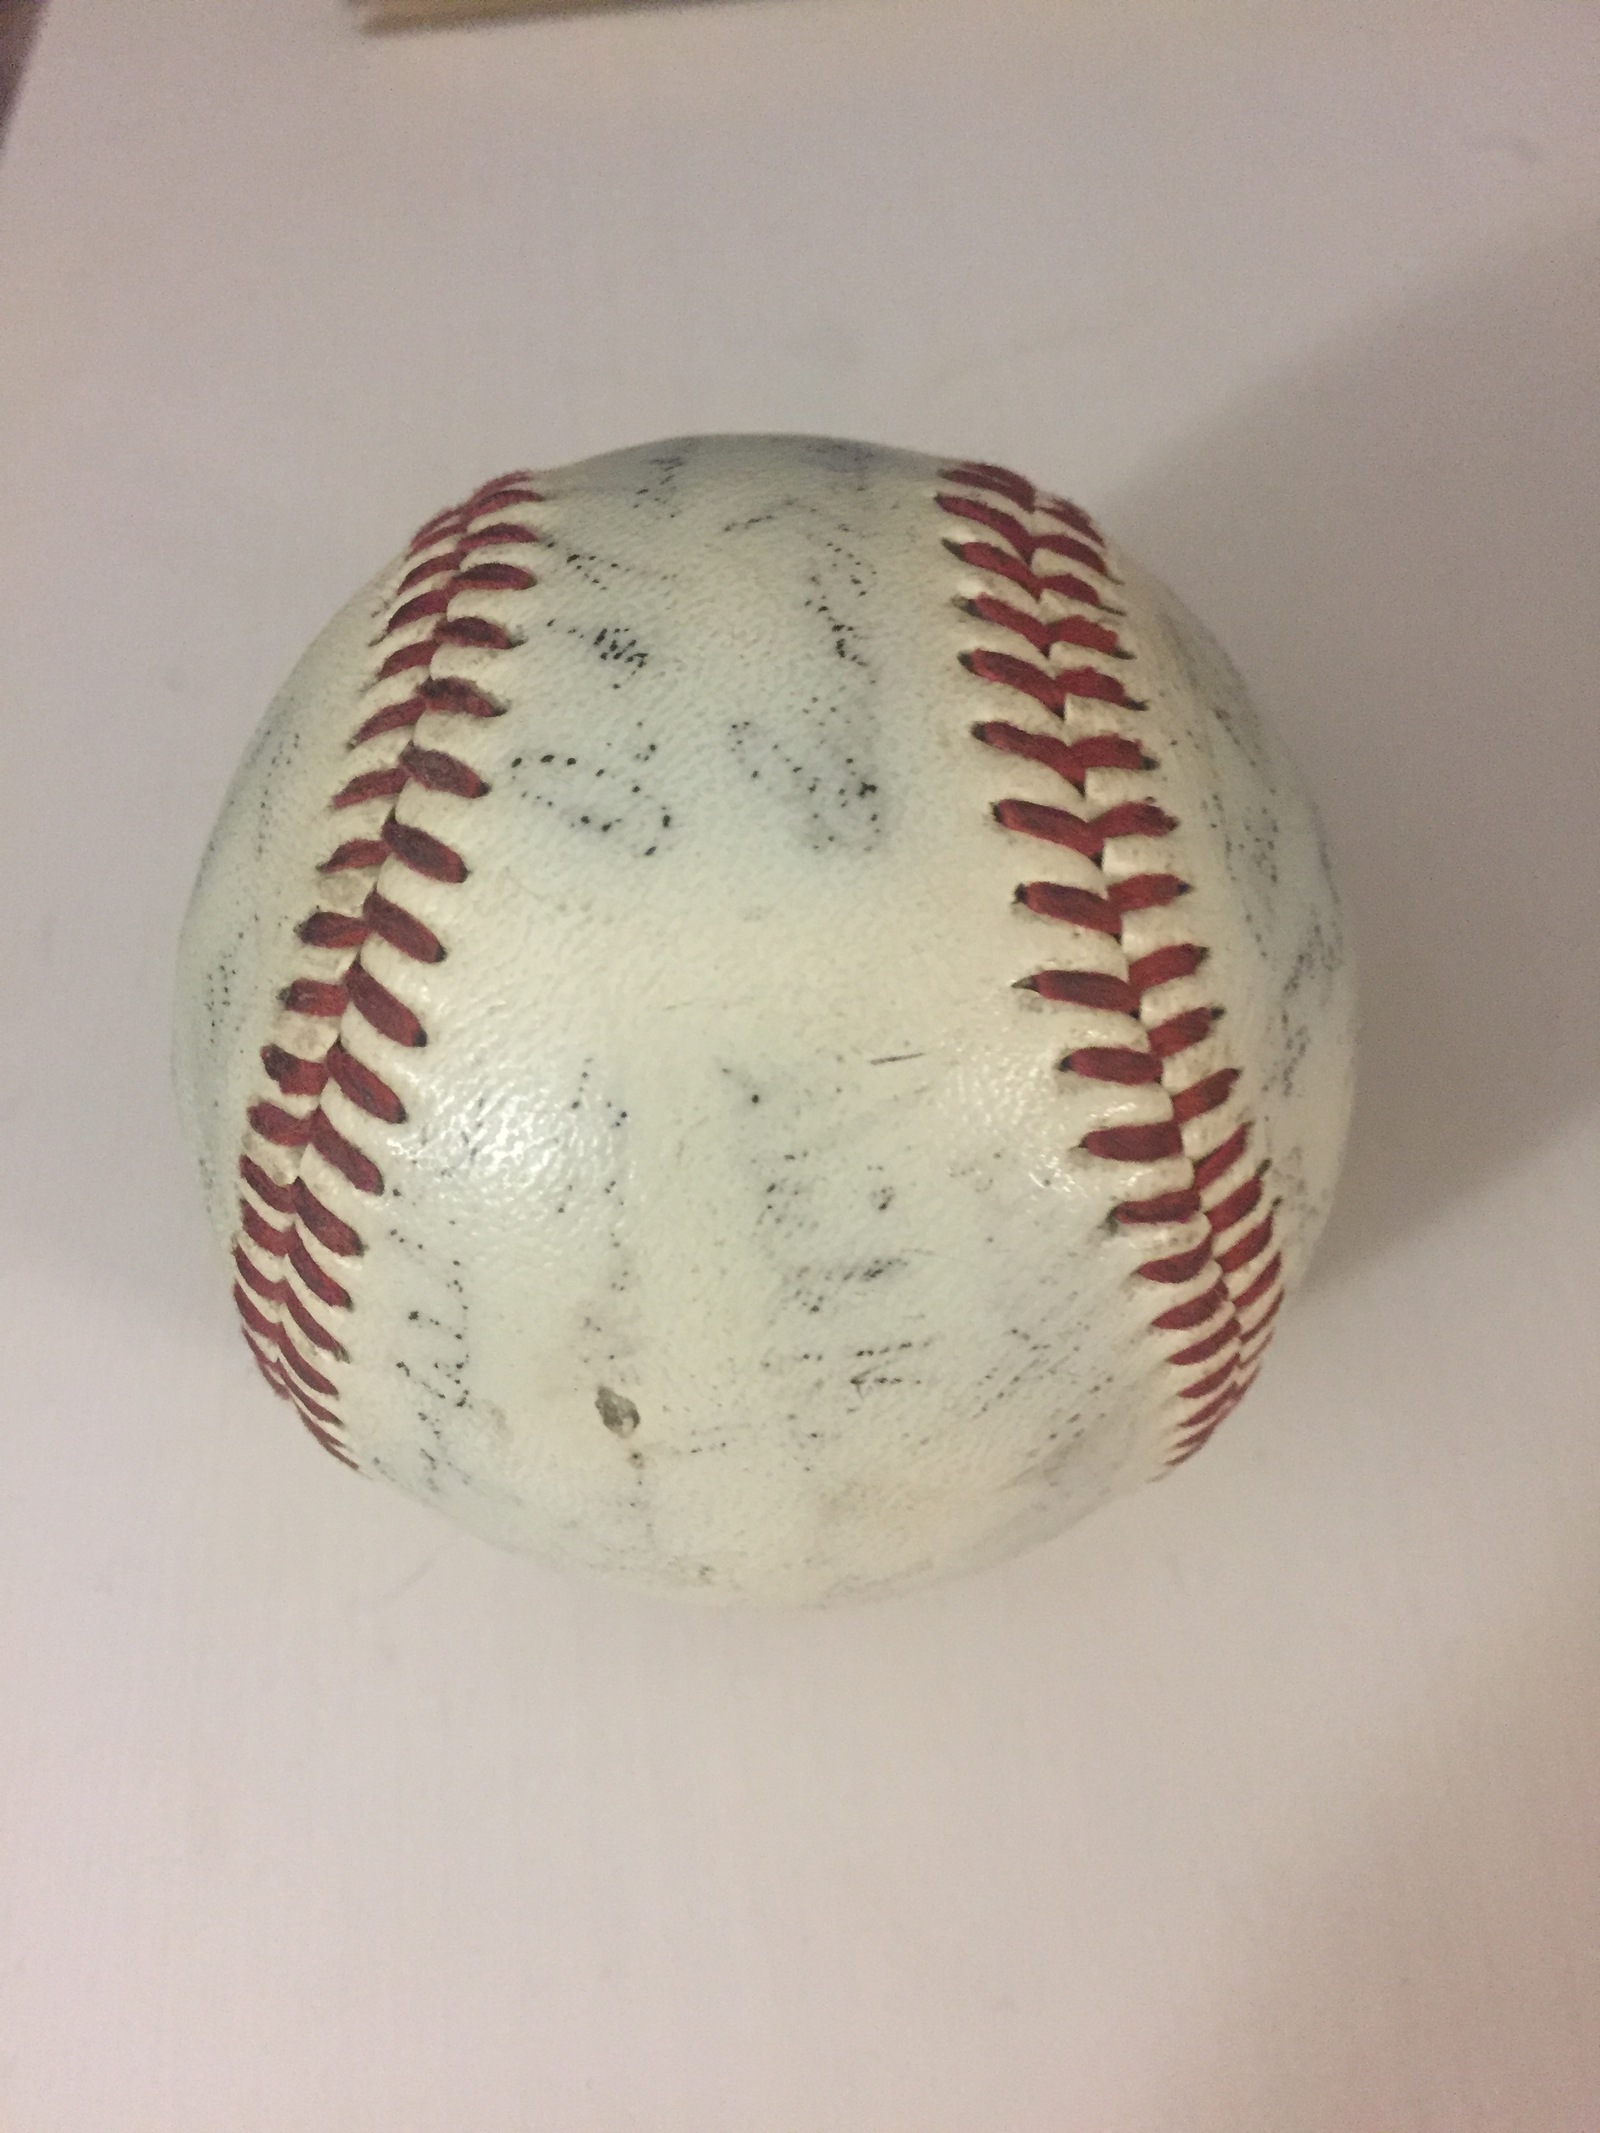 Found while sorting out the trash on the balcony - My, Baseball, Olympics-80, Find, Longpost